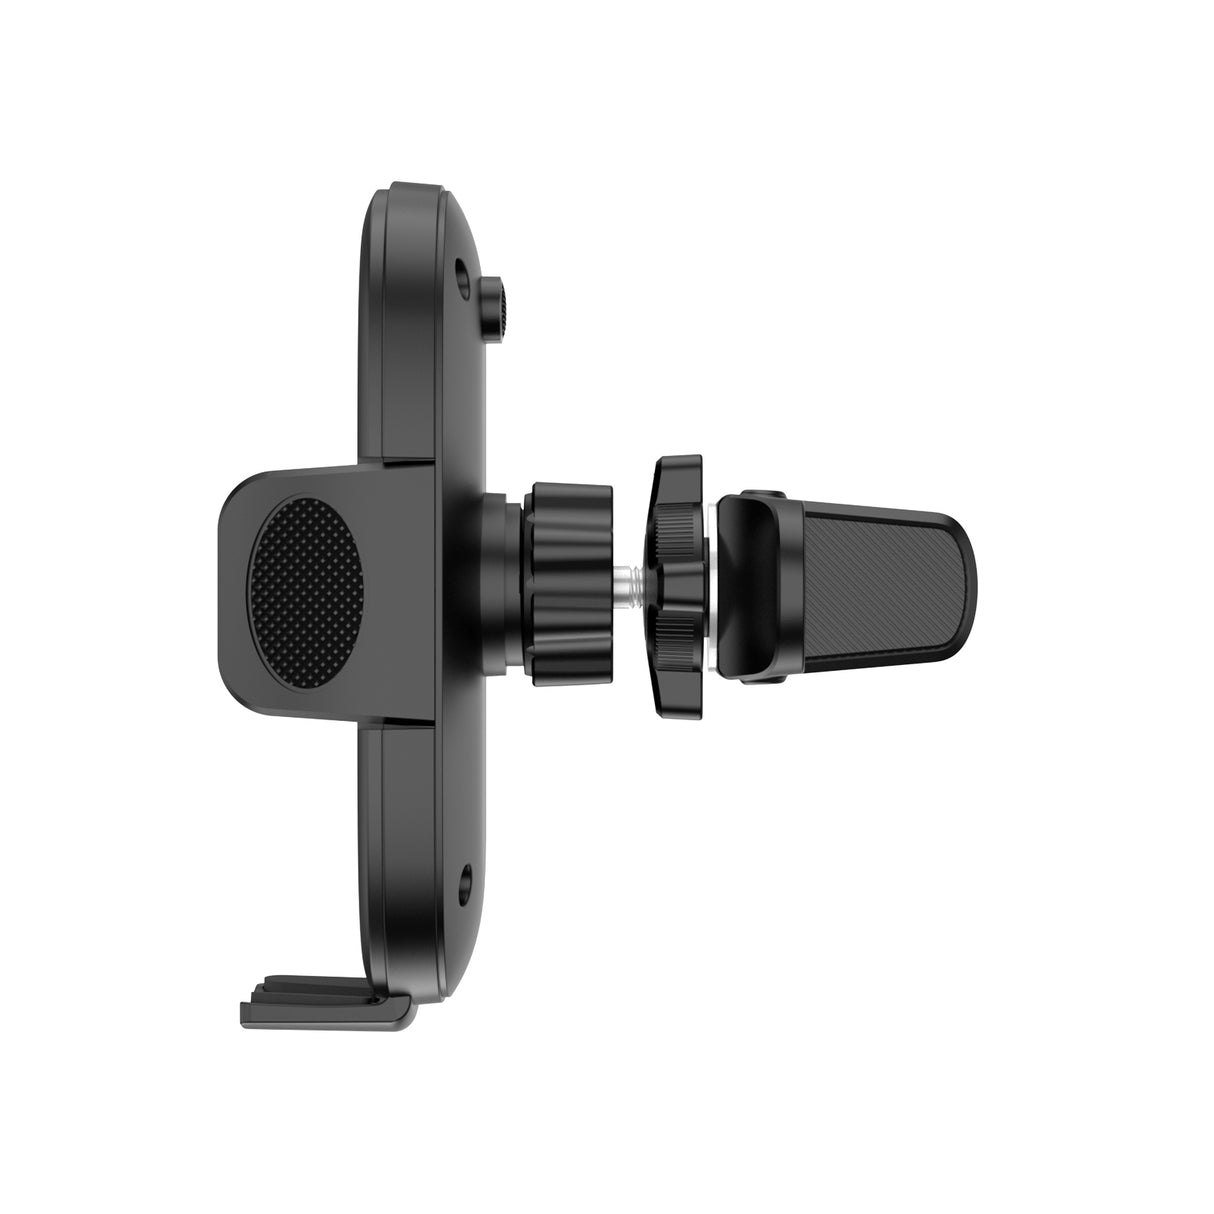 Choetech Magnetic Car Mount Stand for iphone12/13/14/15